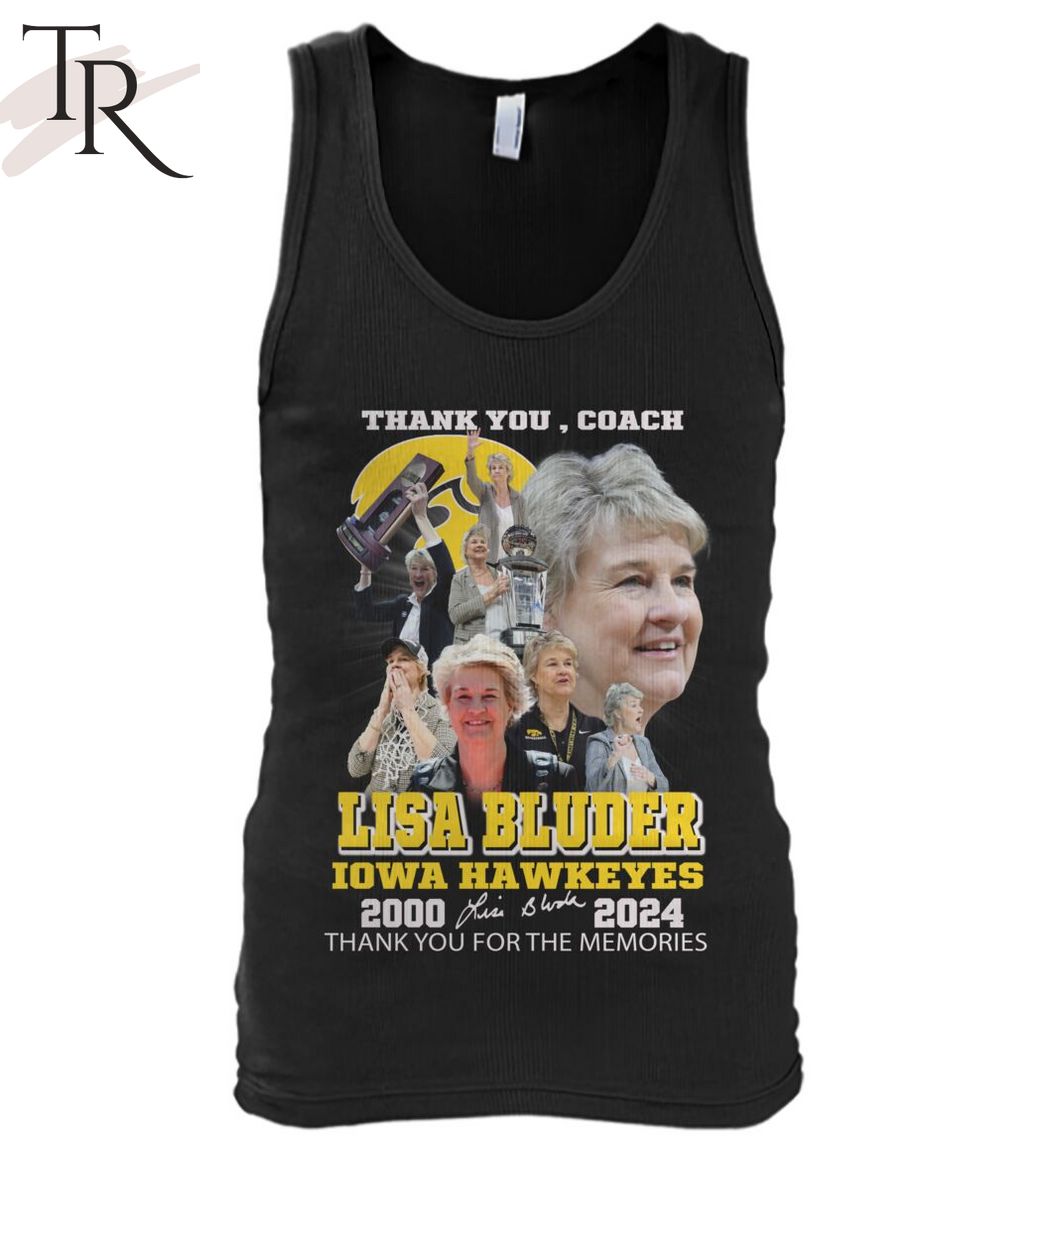 Thank You, Coach Lisa Bluder Iowa Hawkeyes 2000-2024 Thank You For The Memories T-Shirt